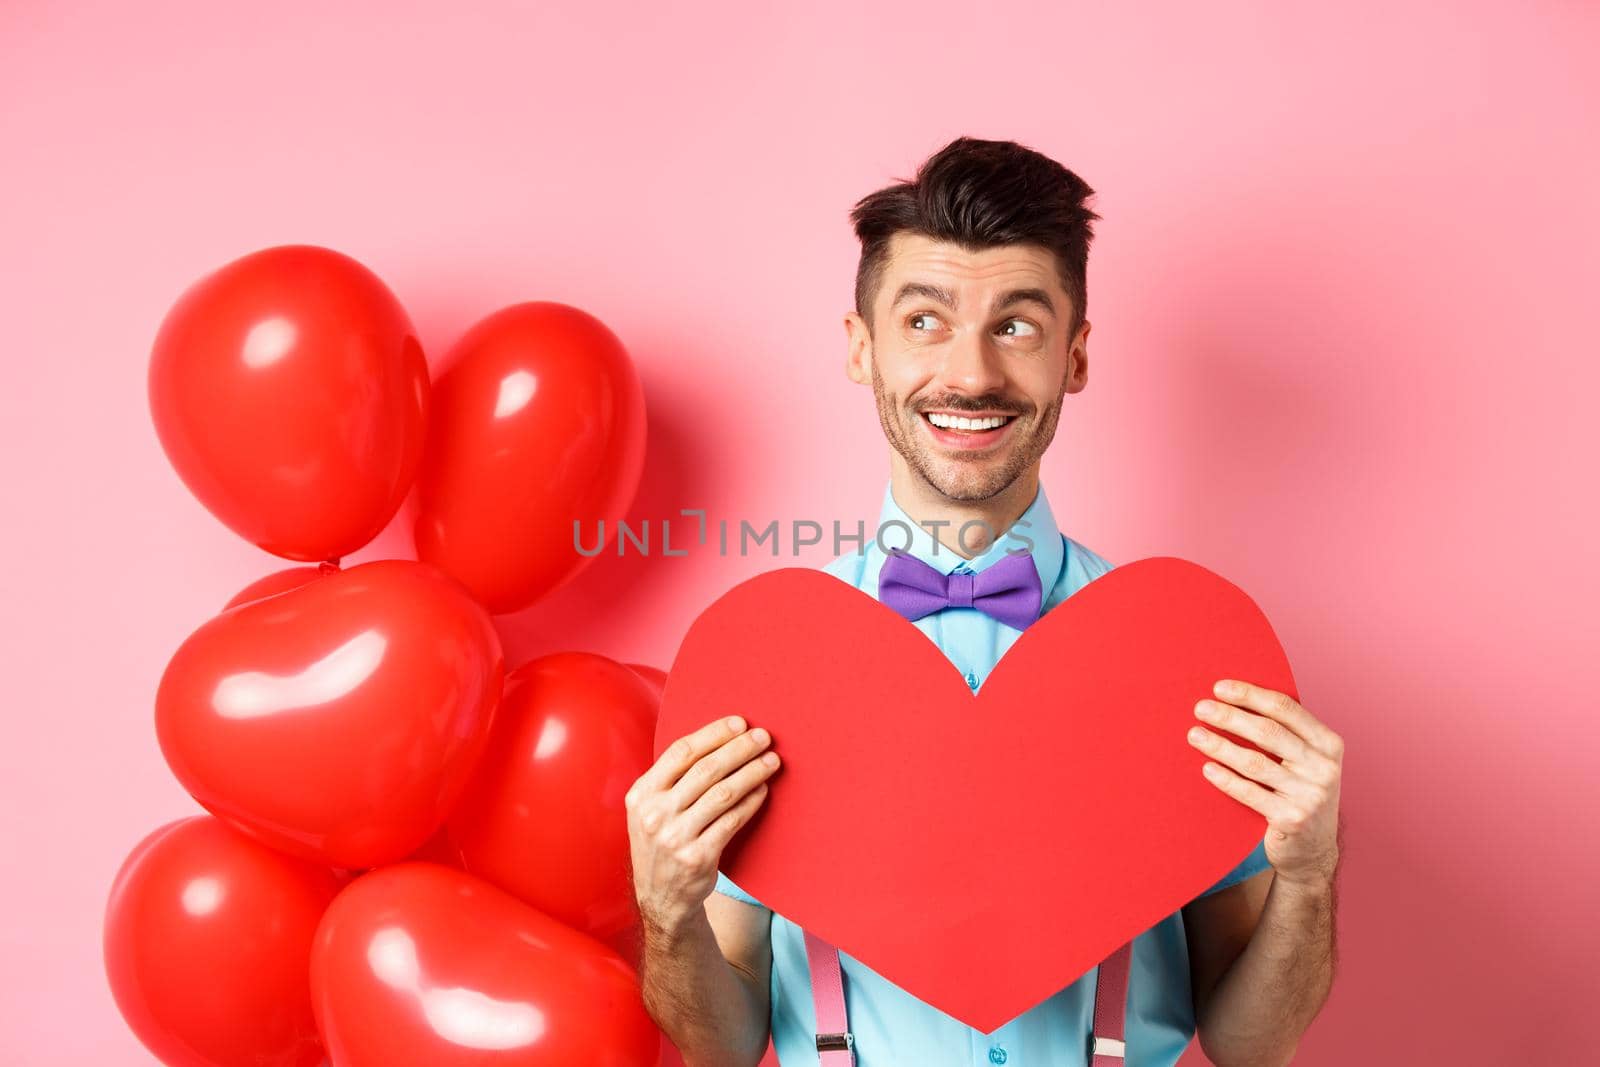 Valentines day concept. Romantic guy smiling and looking left, dreaming of date with lover, showing red big heart cutout, pink background.